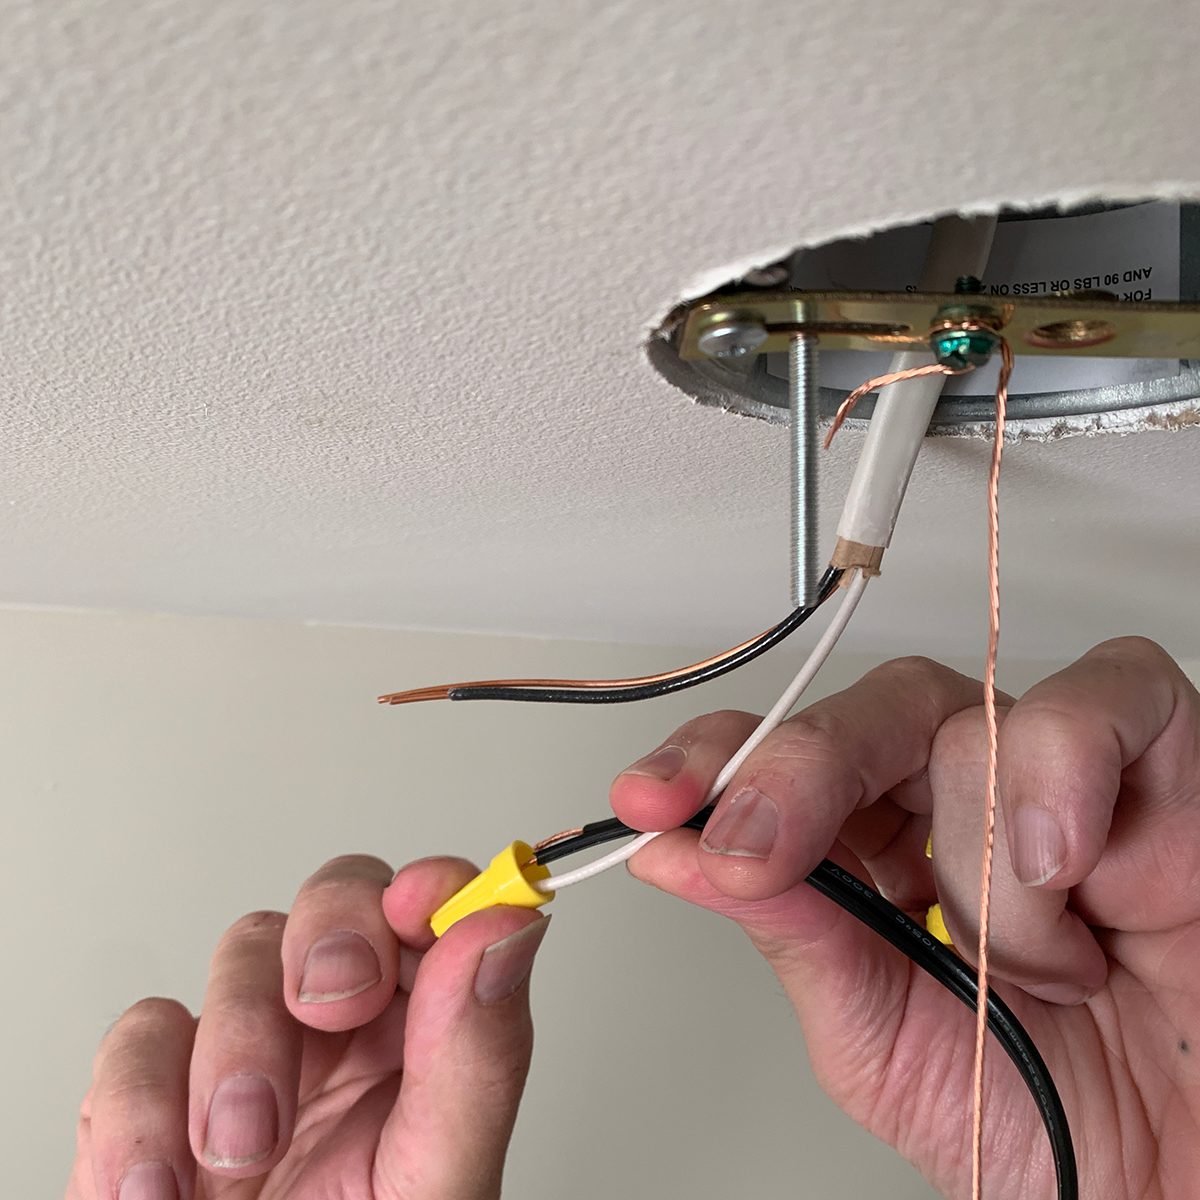 How do I disconnect these type of wires from ceiling lamp? Clear